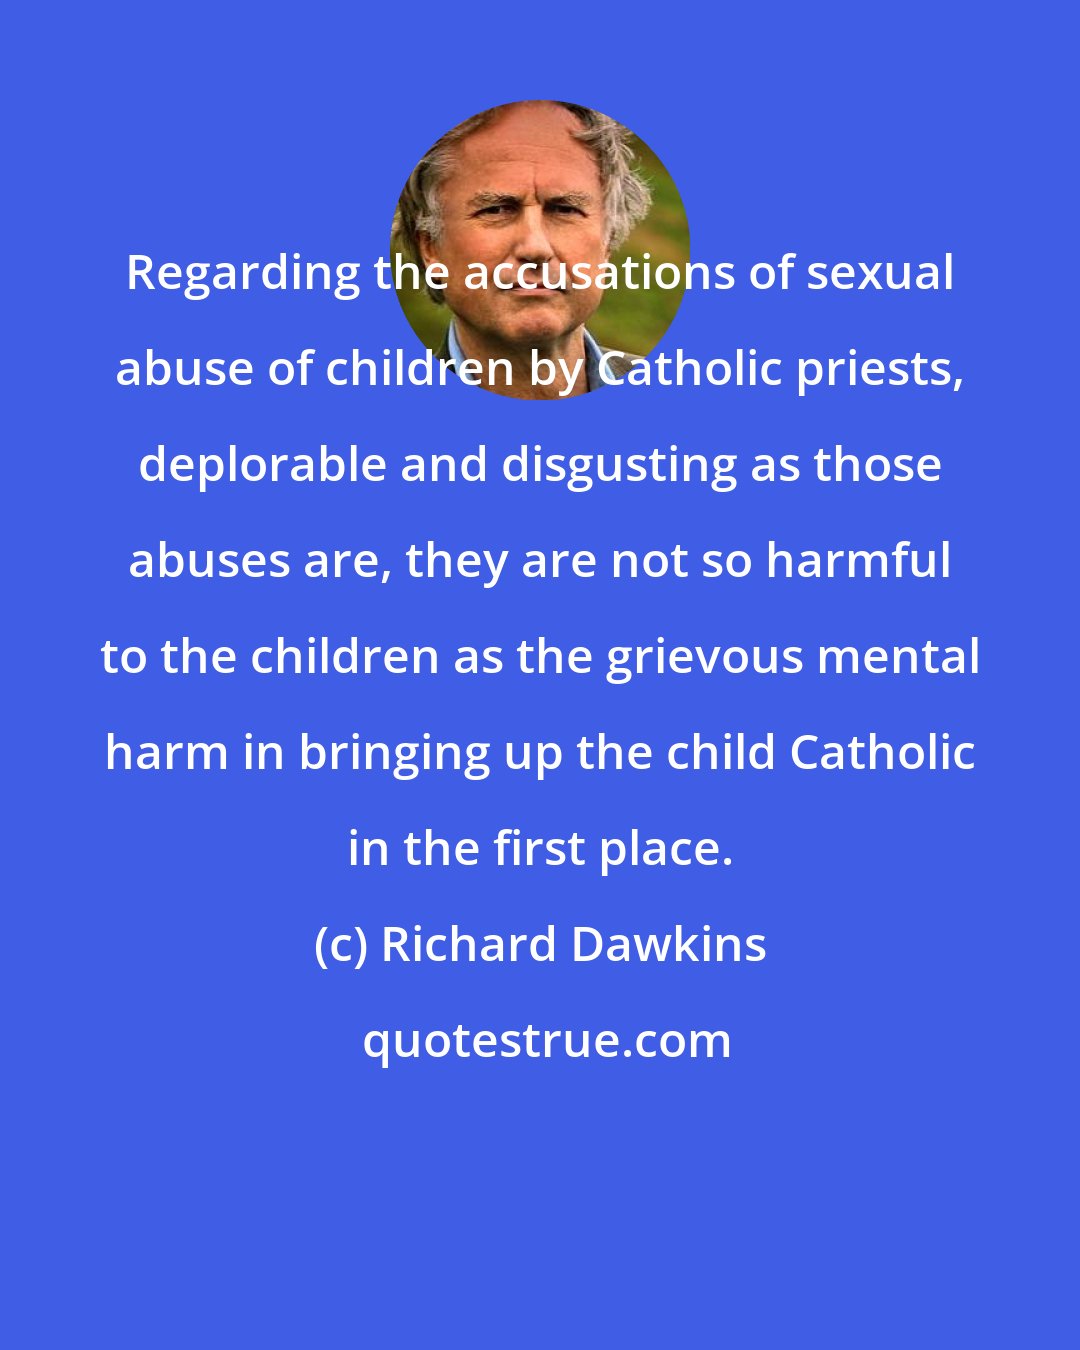 Richard Dawkins: Regarding the accusations of sexual abuse of children by Catholic priests, deplorable and disgusting as those abuses are, they are not so harmful to the children as the grievous mental harm in bringing up the child Catholic in the first place.